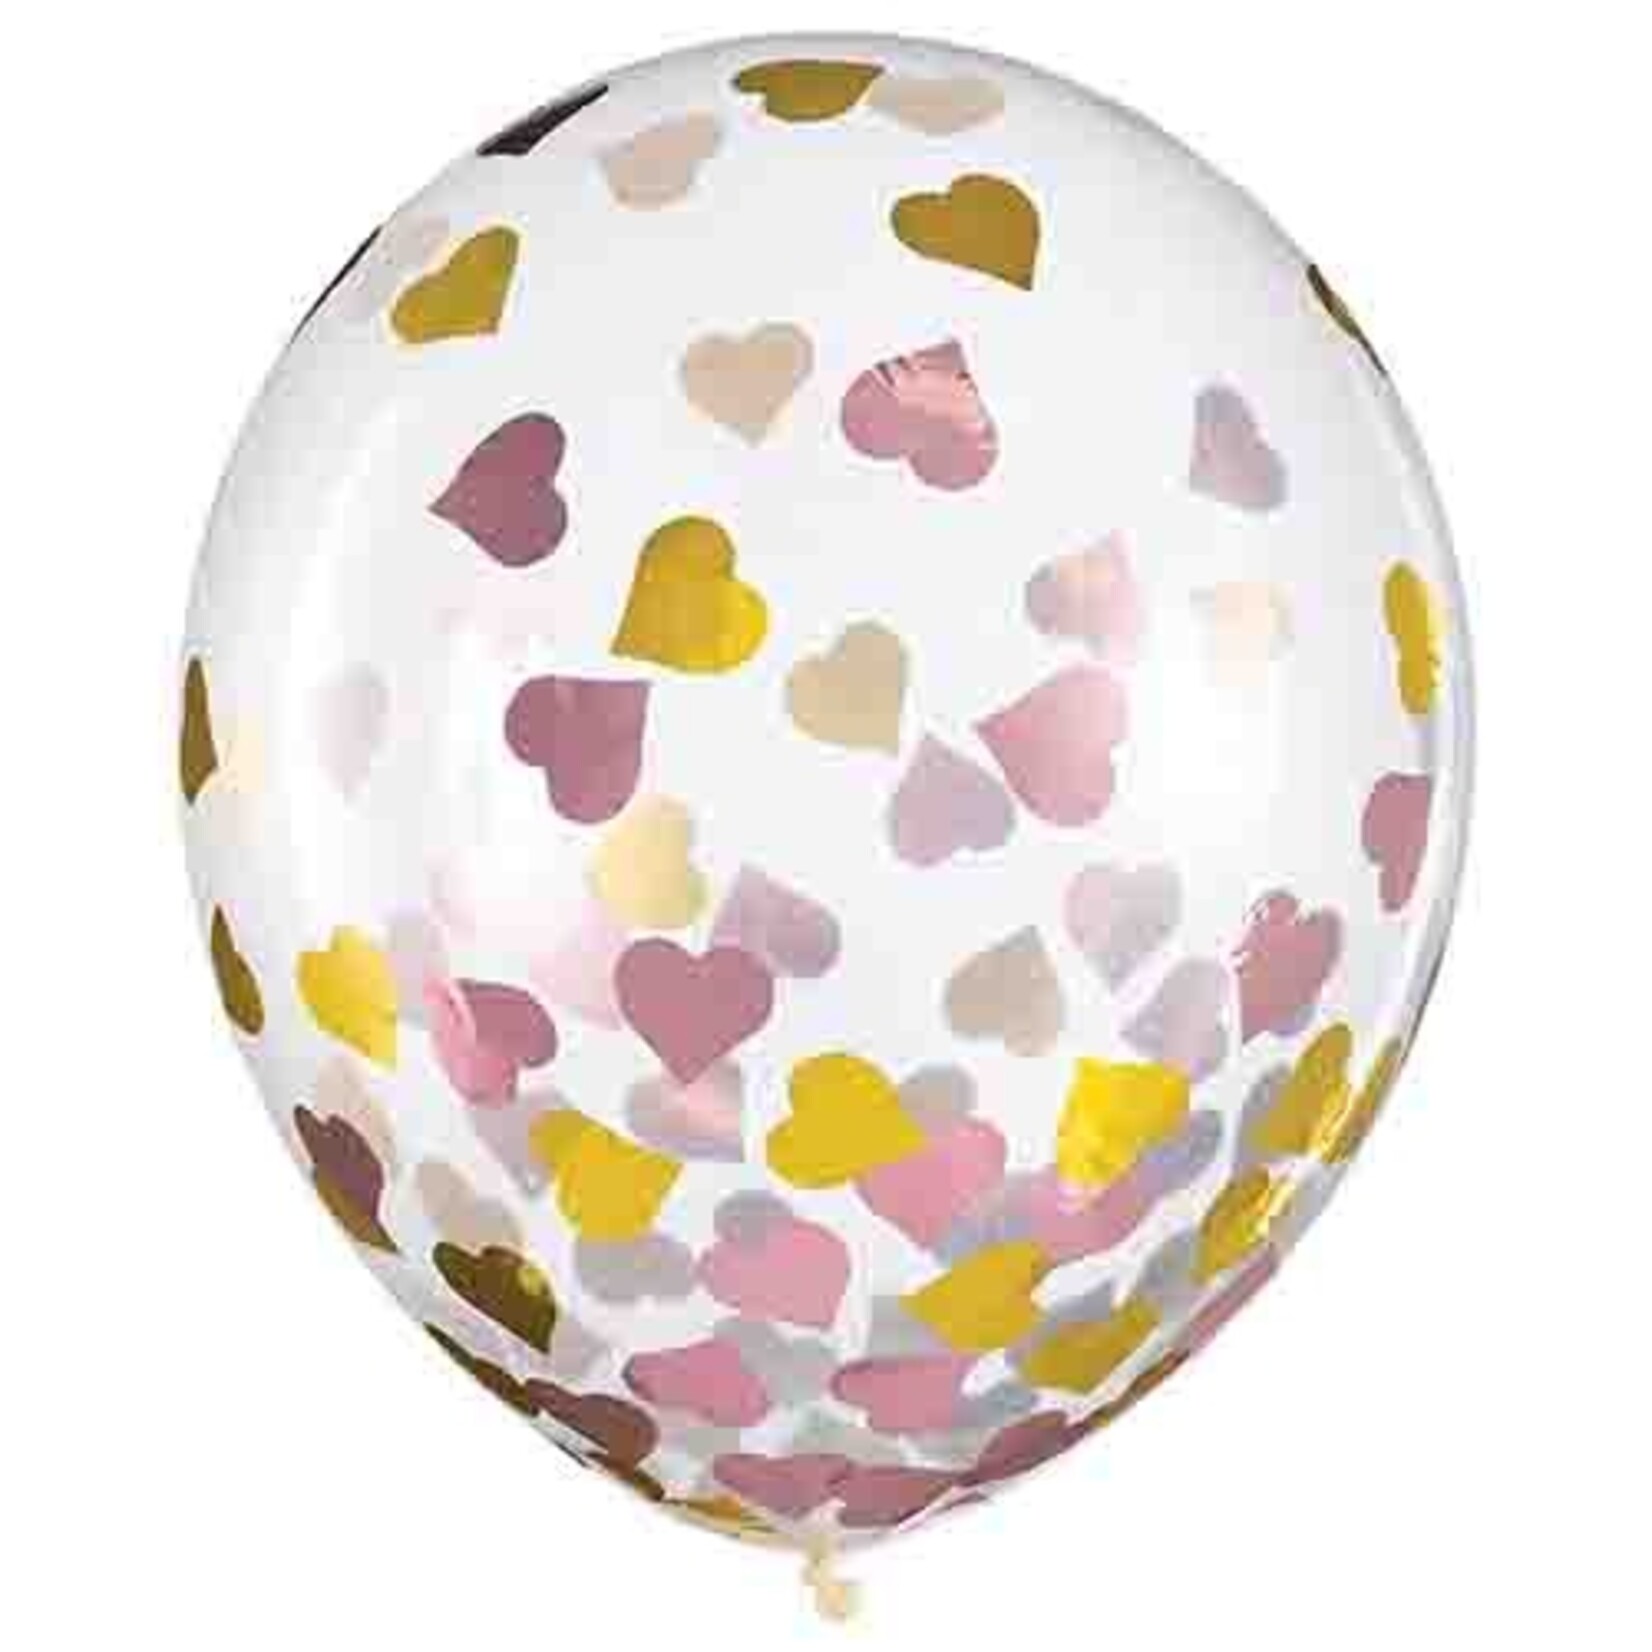 Amscan 12" Clear Latex Balloons w/ Gold & Pink Heart Confetti - 6ct.